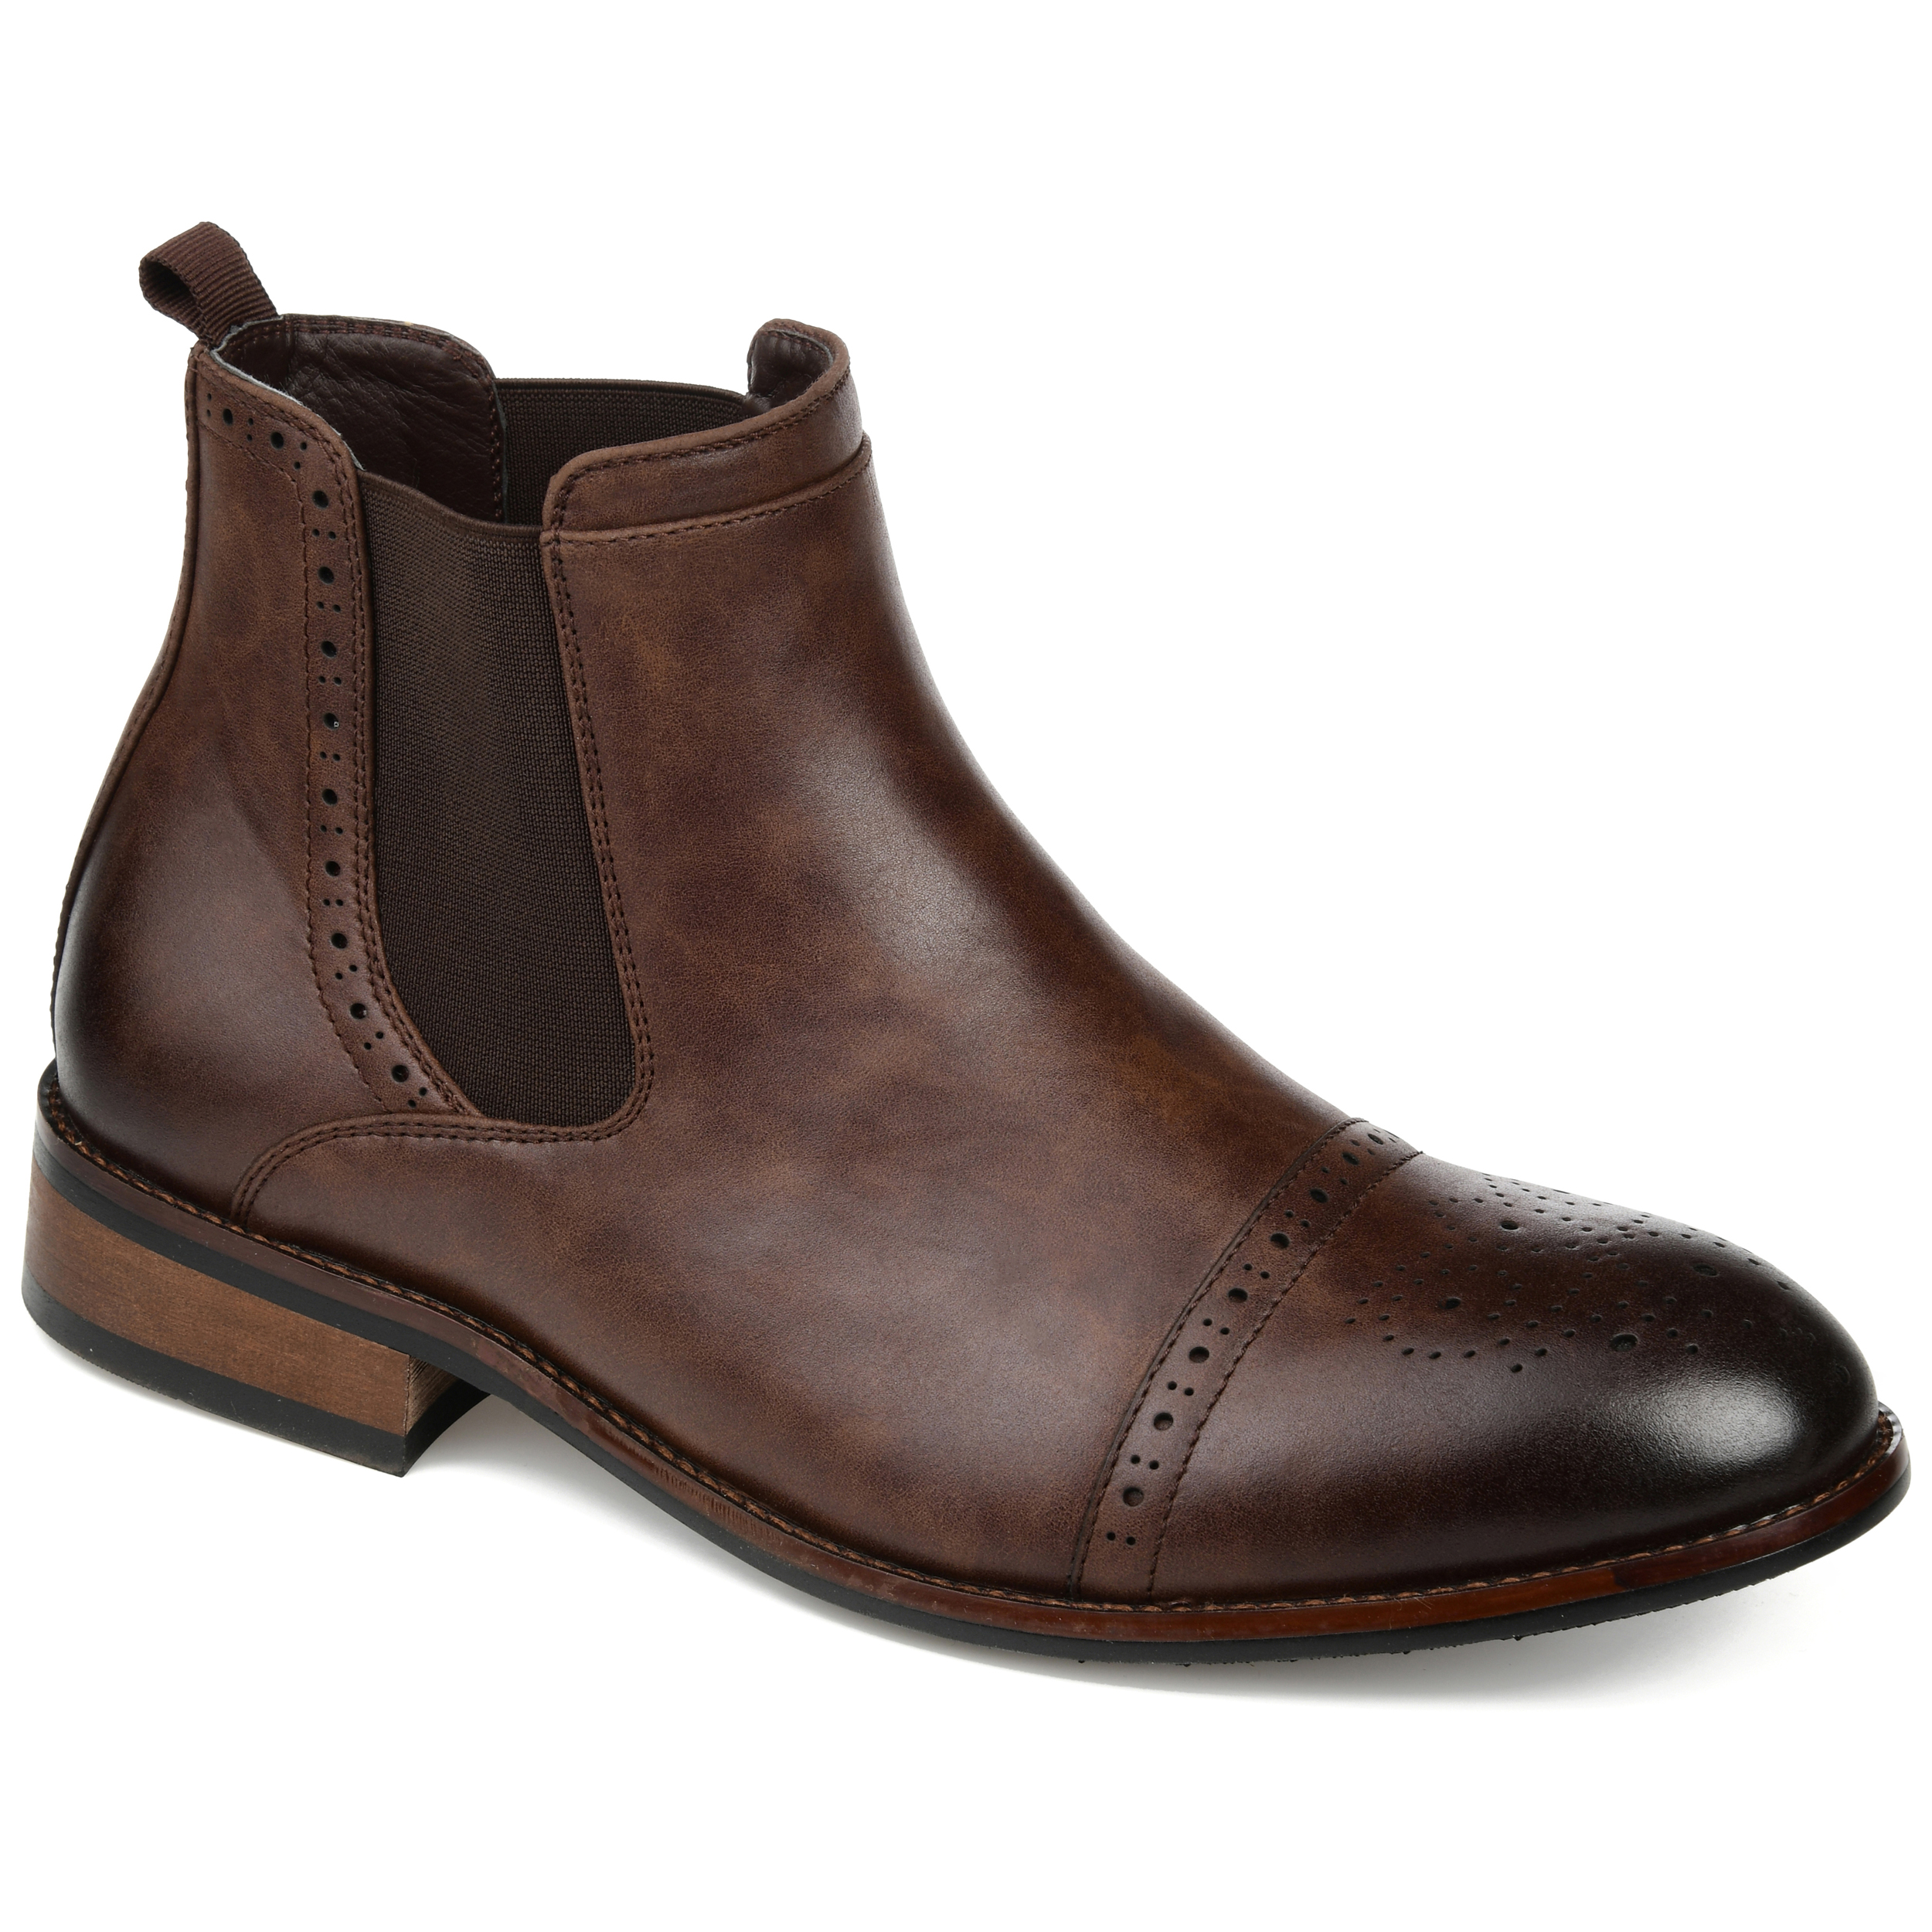 Daxx Mens Brogue Detailing Chelsea Boot - image 1 of 5